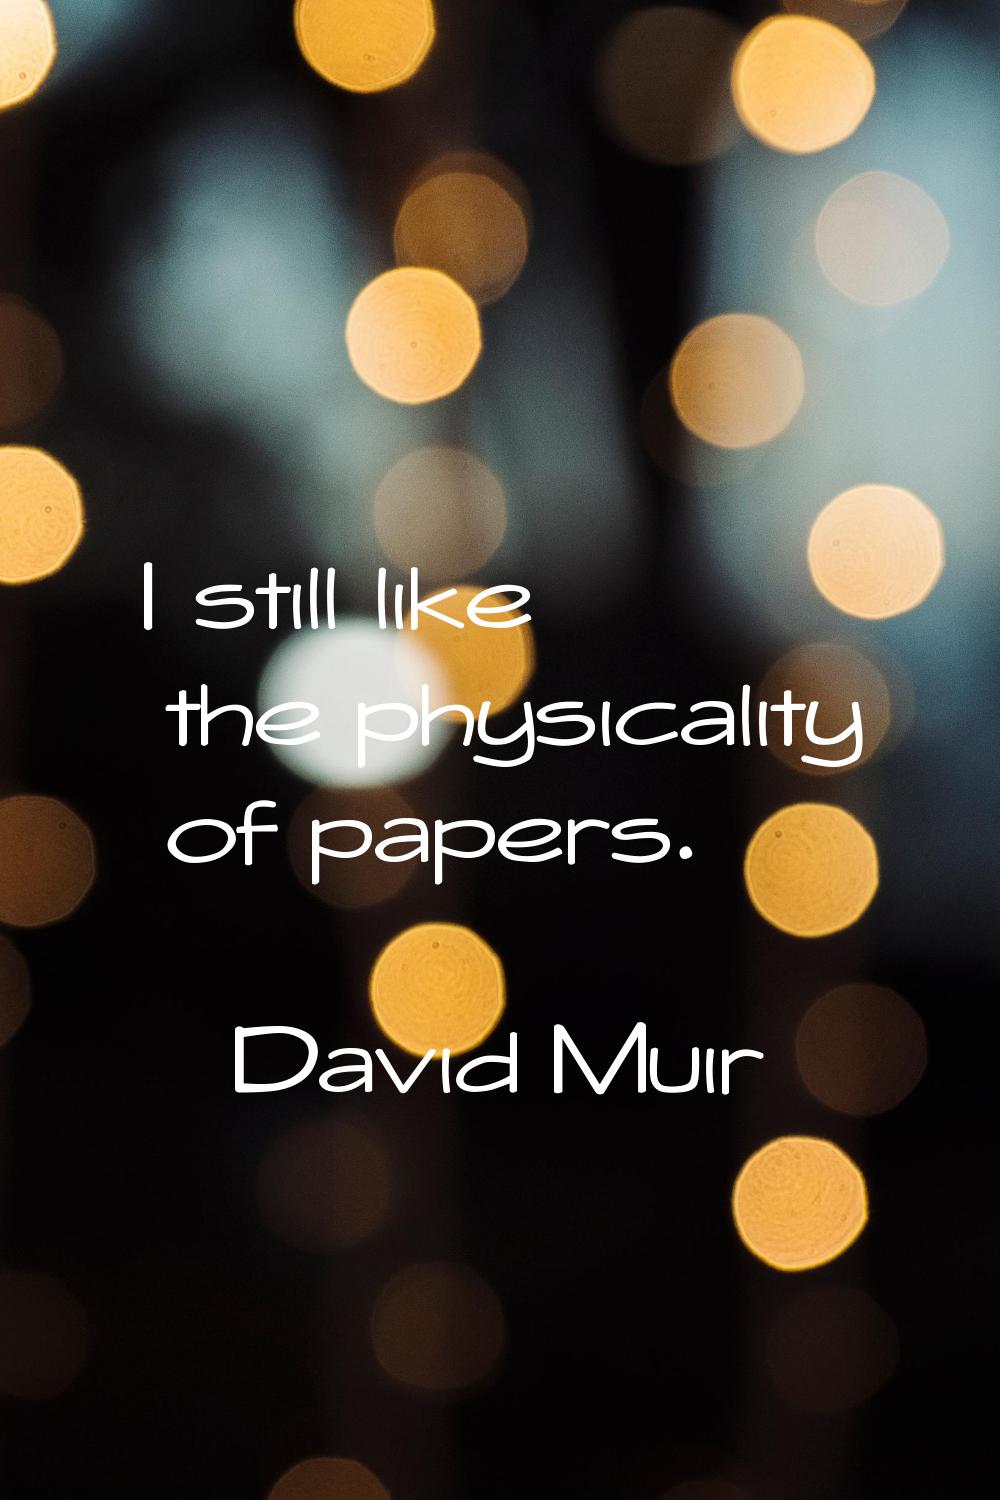 I still like the physicality of papers.